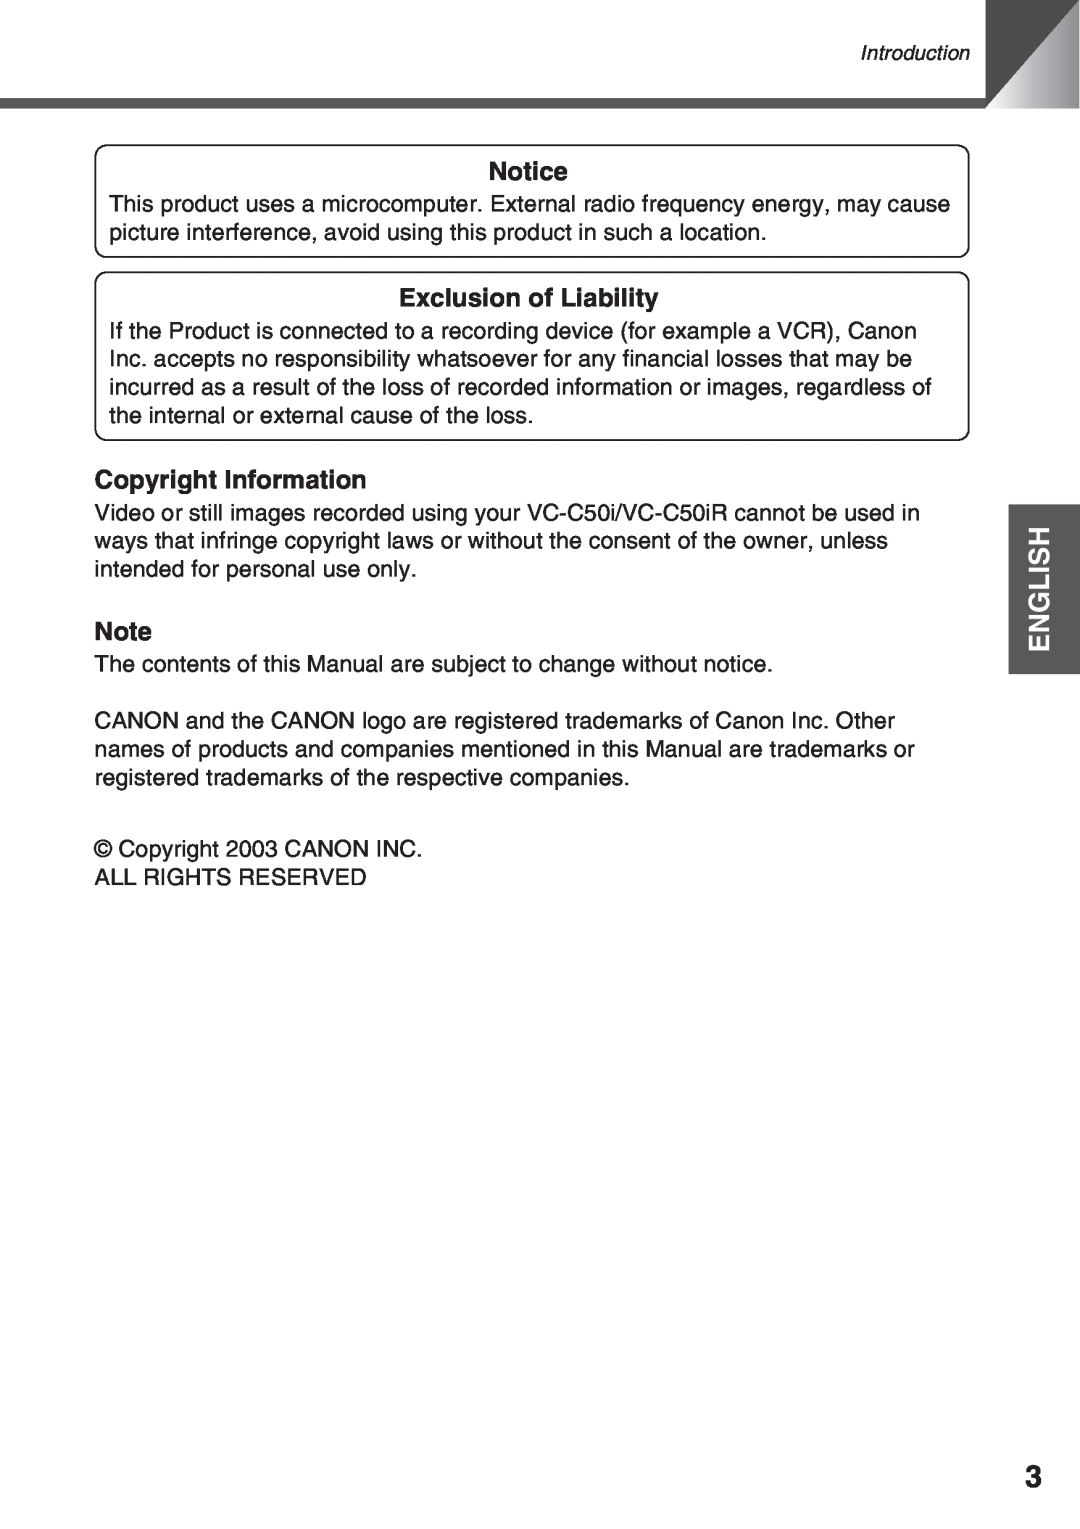 Canon VC-C50i, VC-C50IR instruction manual Notice, Exclusion of Liability, Copyright Information, English 